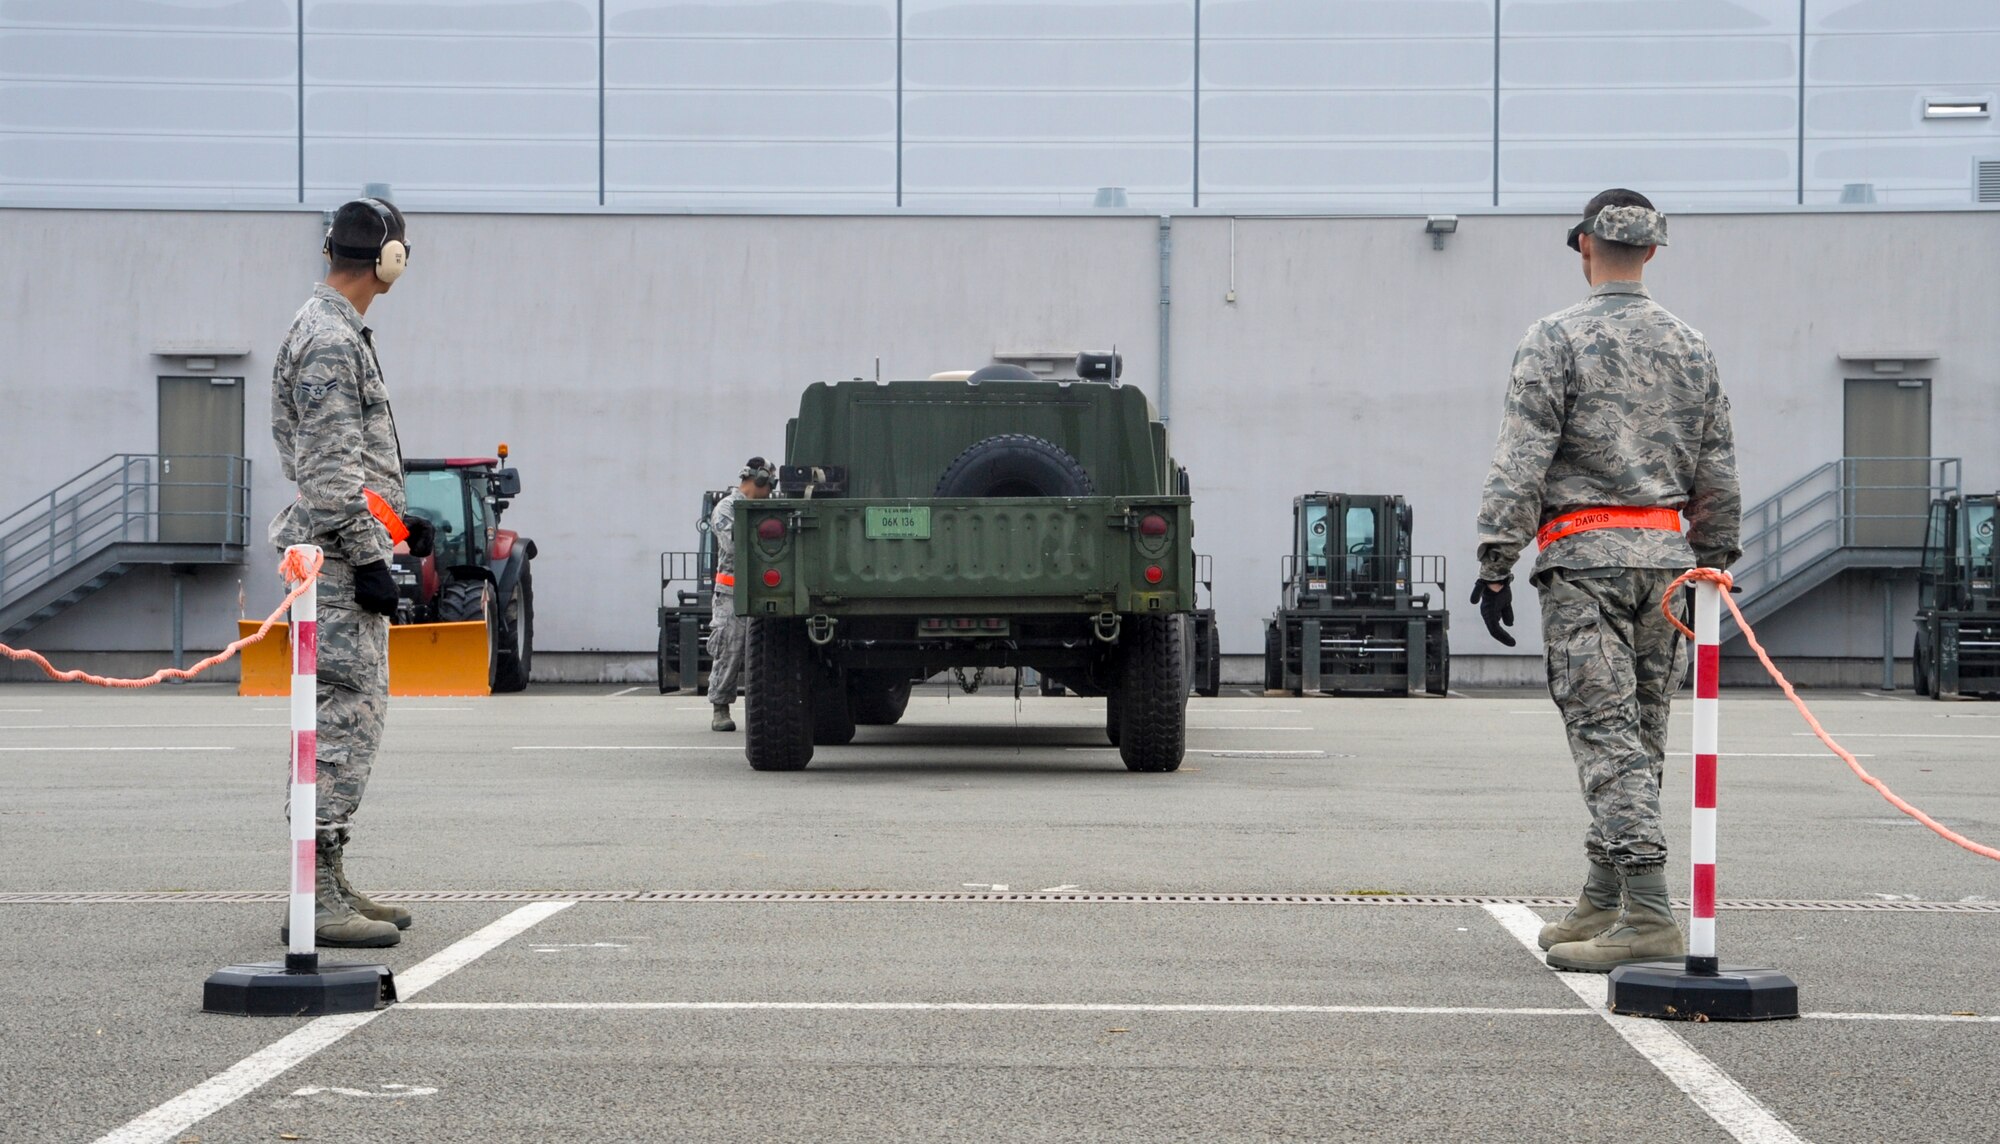 Airmen from the 86th Logistics Readiness Squadron help navigate a vehicle and trailer into a parking spot during the 2016 European Port Dawg Rodeo Sept. 17, 2016, at Ramstein Air Base, Germany. The exercise was conducted to simulate guiding a C-130J Super Hercules onto a ramp after landing. Airmen from the 86th Airlift Wing, 435th Air Ground Operations Wing and 521st Air Mobility Operations Wing competed in physical activities related to their job to earn bragging rights as being the best of the best. (U.S. Air Force photo/Staff Sgt. Timothy Moore)